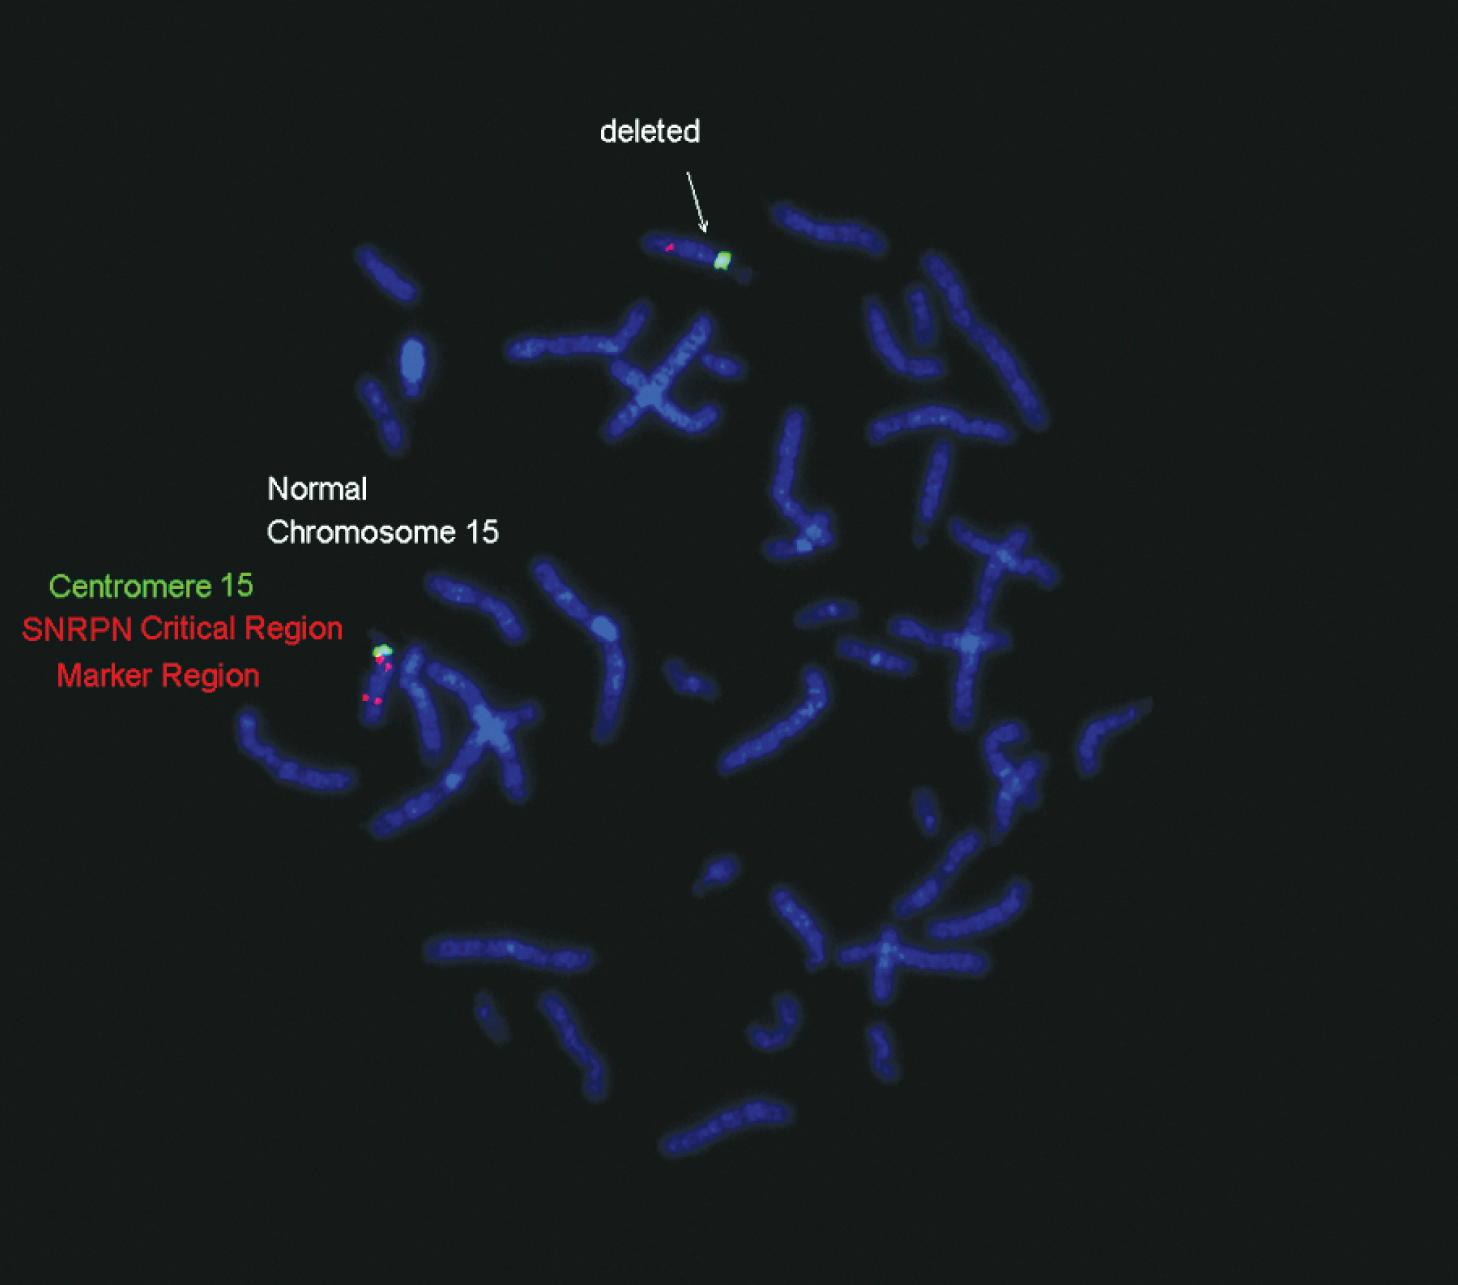 Fig. 1.20, 4′,6′-Diamidino-2-phenylindole–counterstained metaphase and interphase images showing a duplication of the Prader-Willi/Angelman (D15S10 locus) critical region (red). The chromosome 15 centromere is used as a control (green). Adjacent to the centromere in red is the normal pattern for D15S10. SNRPN, Small nuclear ribonucleoprotein-associated polypeptide N.